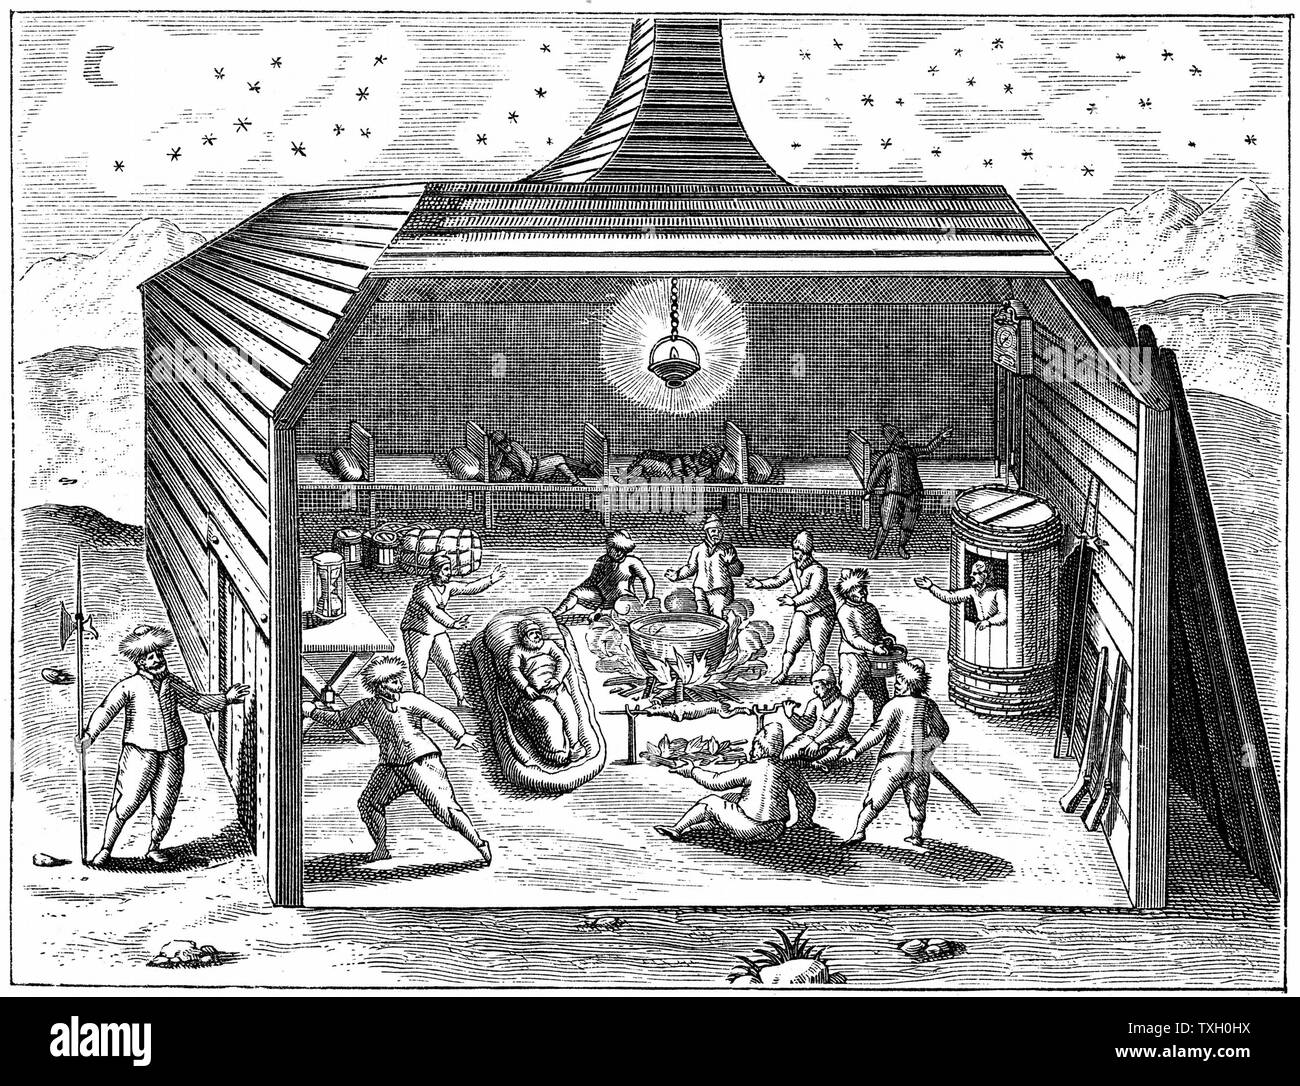 Willem Barents (d.1597) Dutch navigator who led expeditions in search of Northeast Passage. Interior of Barents' winter quarters off Novaya Zemlya; these quarters were discovered in 1871 just as they had been left by the doomed expedition. From an engraving by De Bry Stock Photo